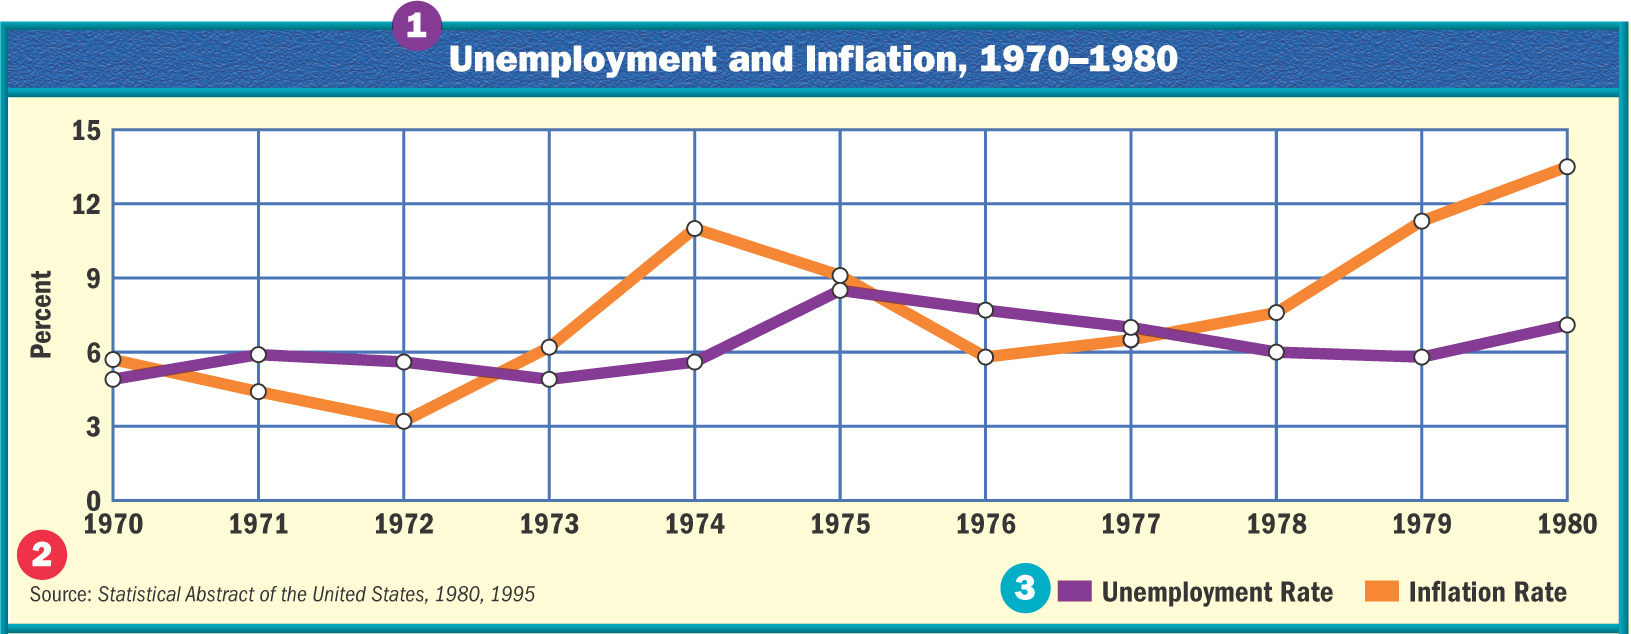 a graph compares Unemployment and Inflation from 1970 to 1980.